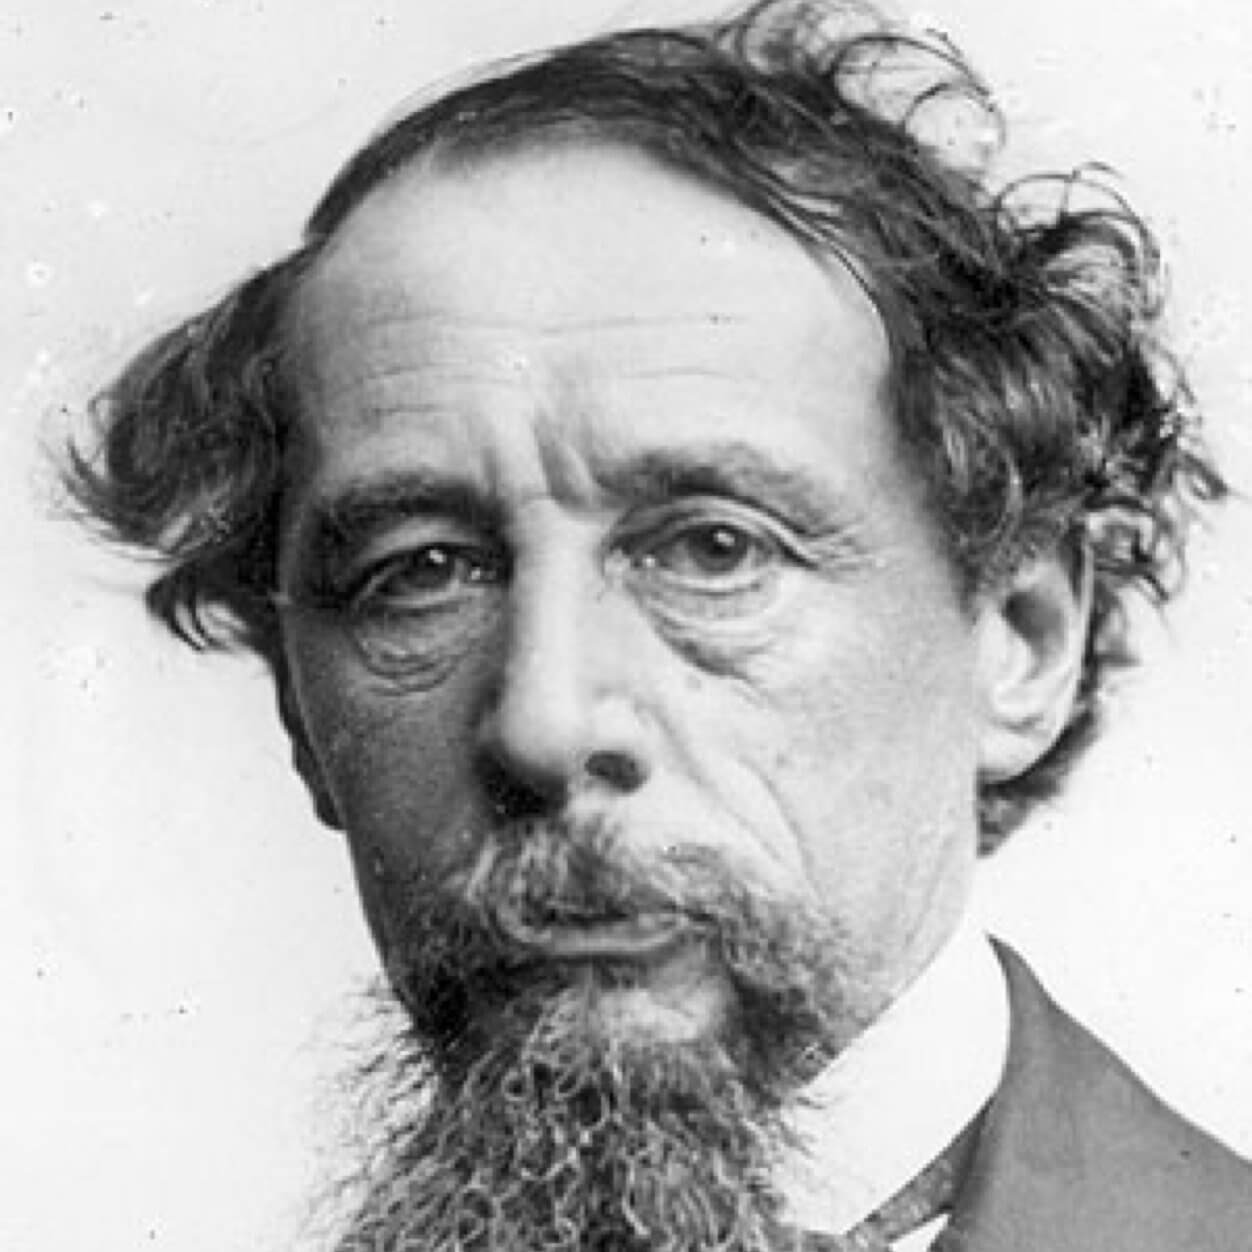 Charles Dickens Biography  Reading Comprehension Worksheet  Informational  Text  Reading comprehension Reading comprehension worksheets Reading  comprehension texts